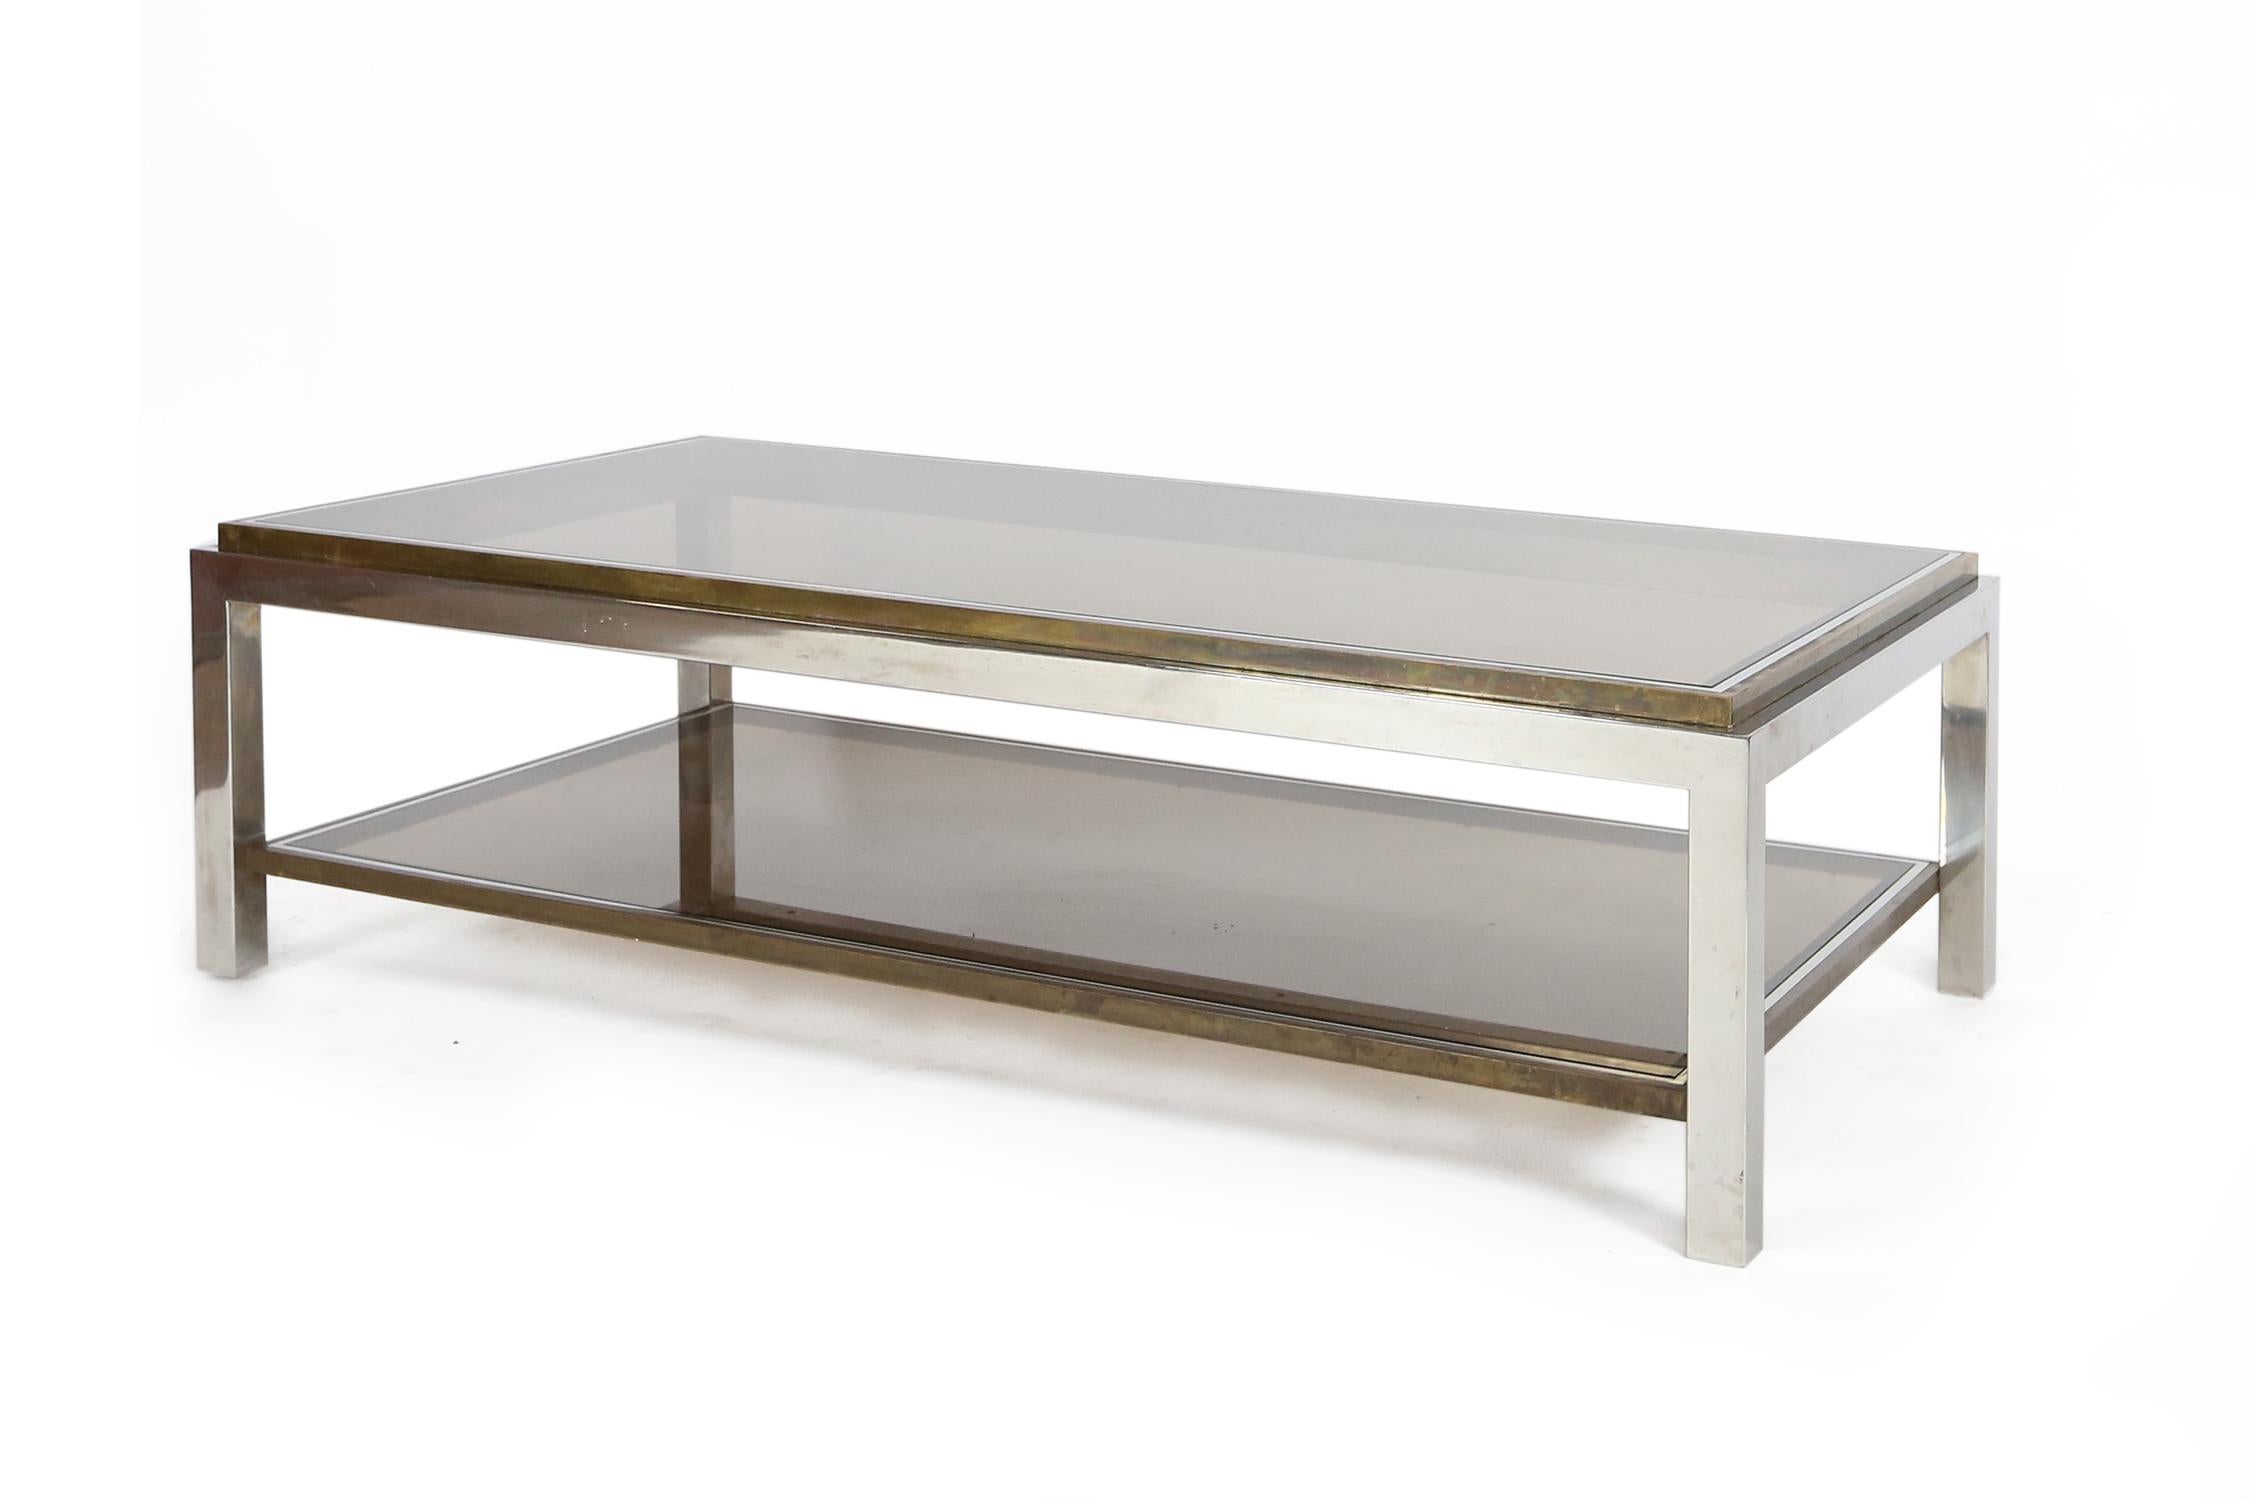 Rectangular two-tiered coffee table with stepped brass trim holding the smoked glass, raised on a chrome frame.
 